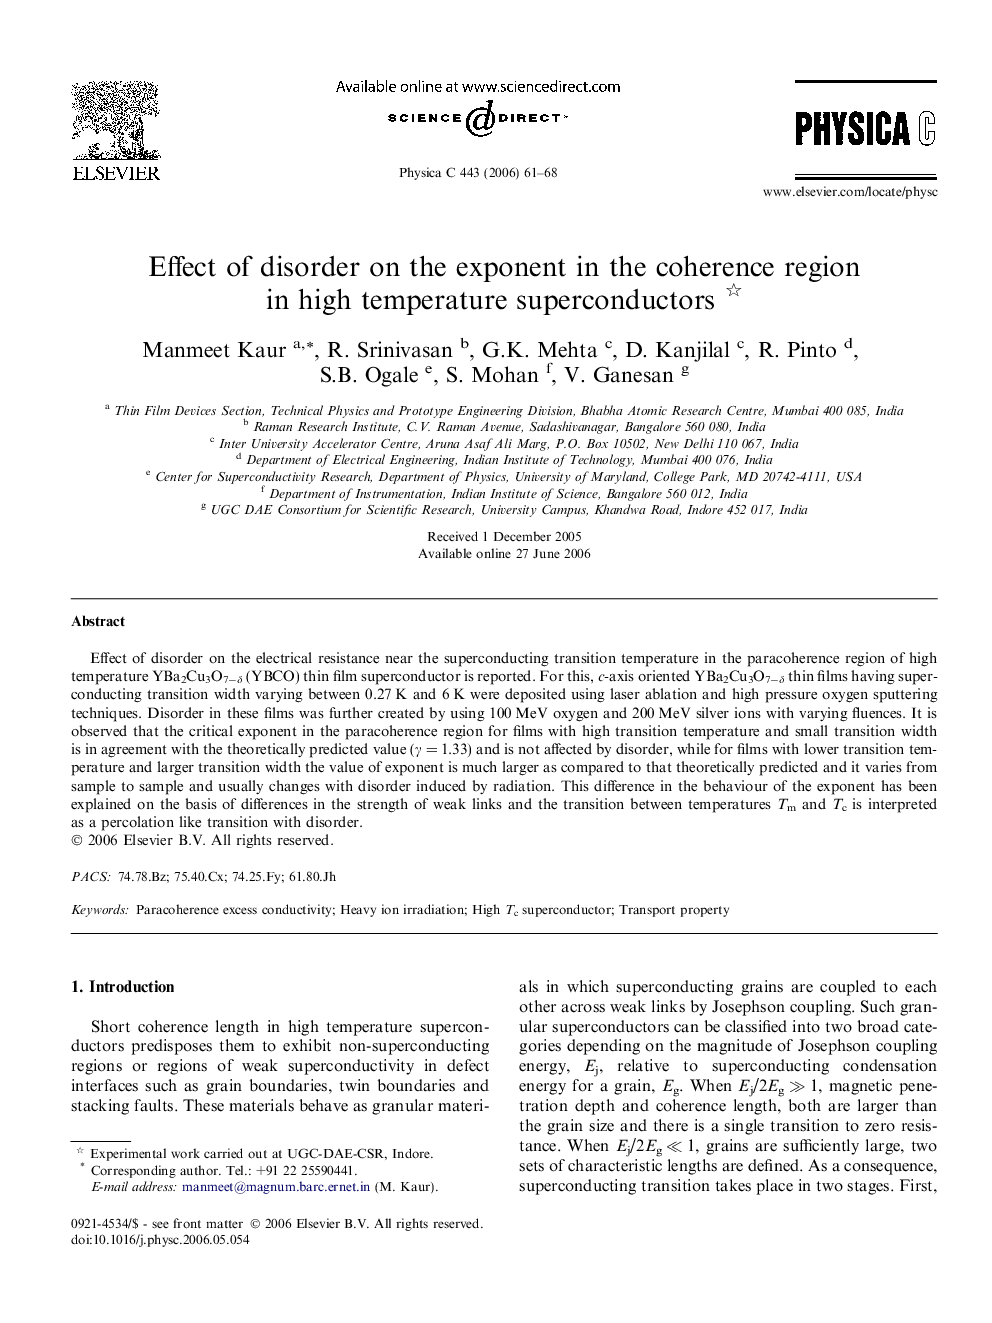 Effect of disorder on the exponent in the coherence region in high temperature superconductors 